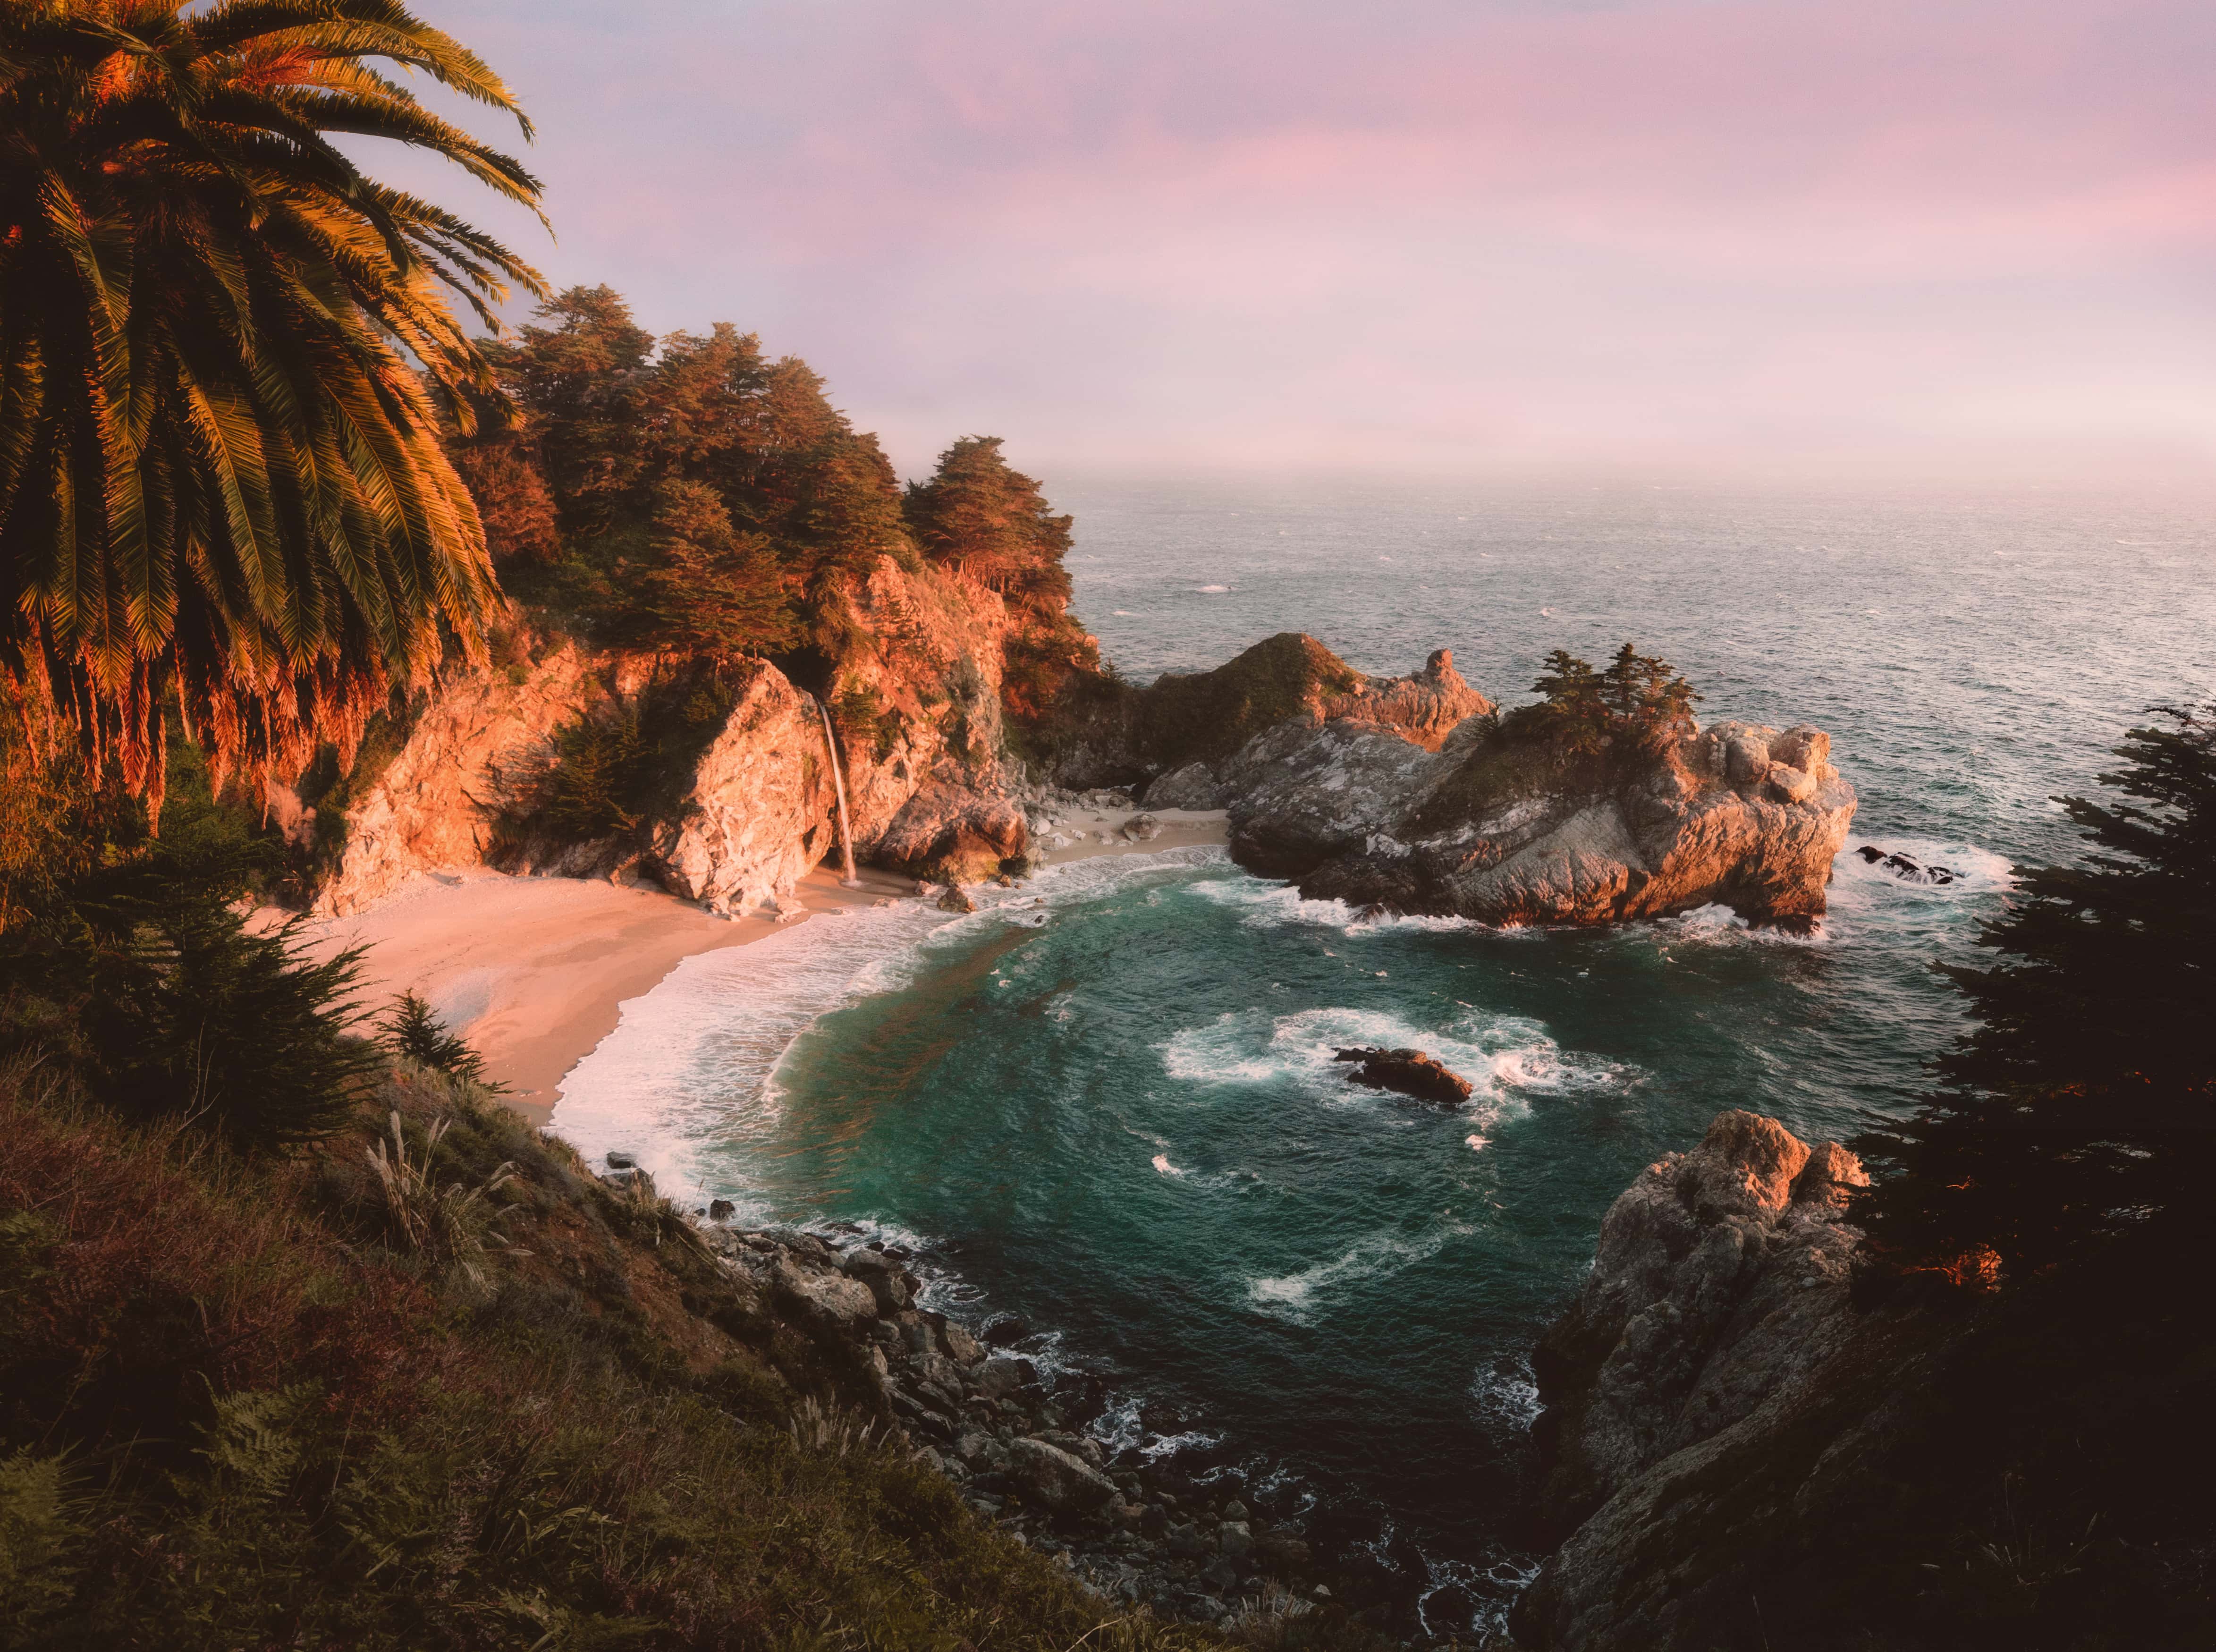 A colorful sunset mixed with golden sunset light on the hillsides at McWay Falls in Julia Pfeiffer Burns State Park.